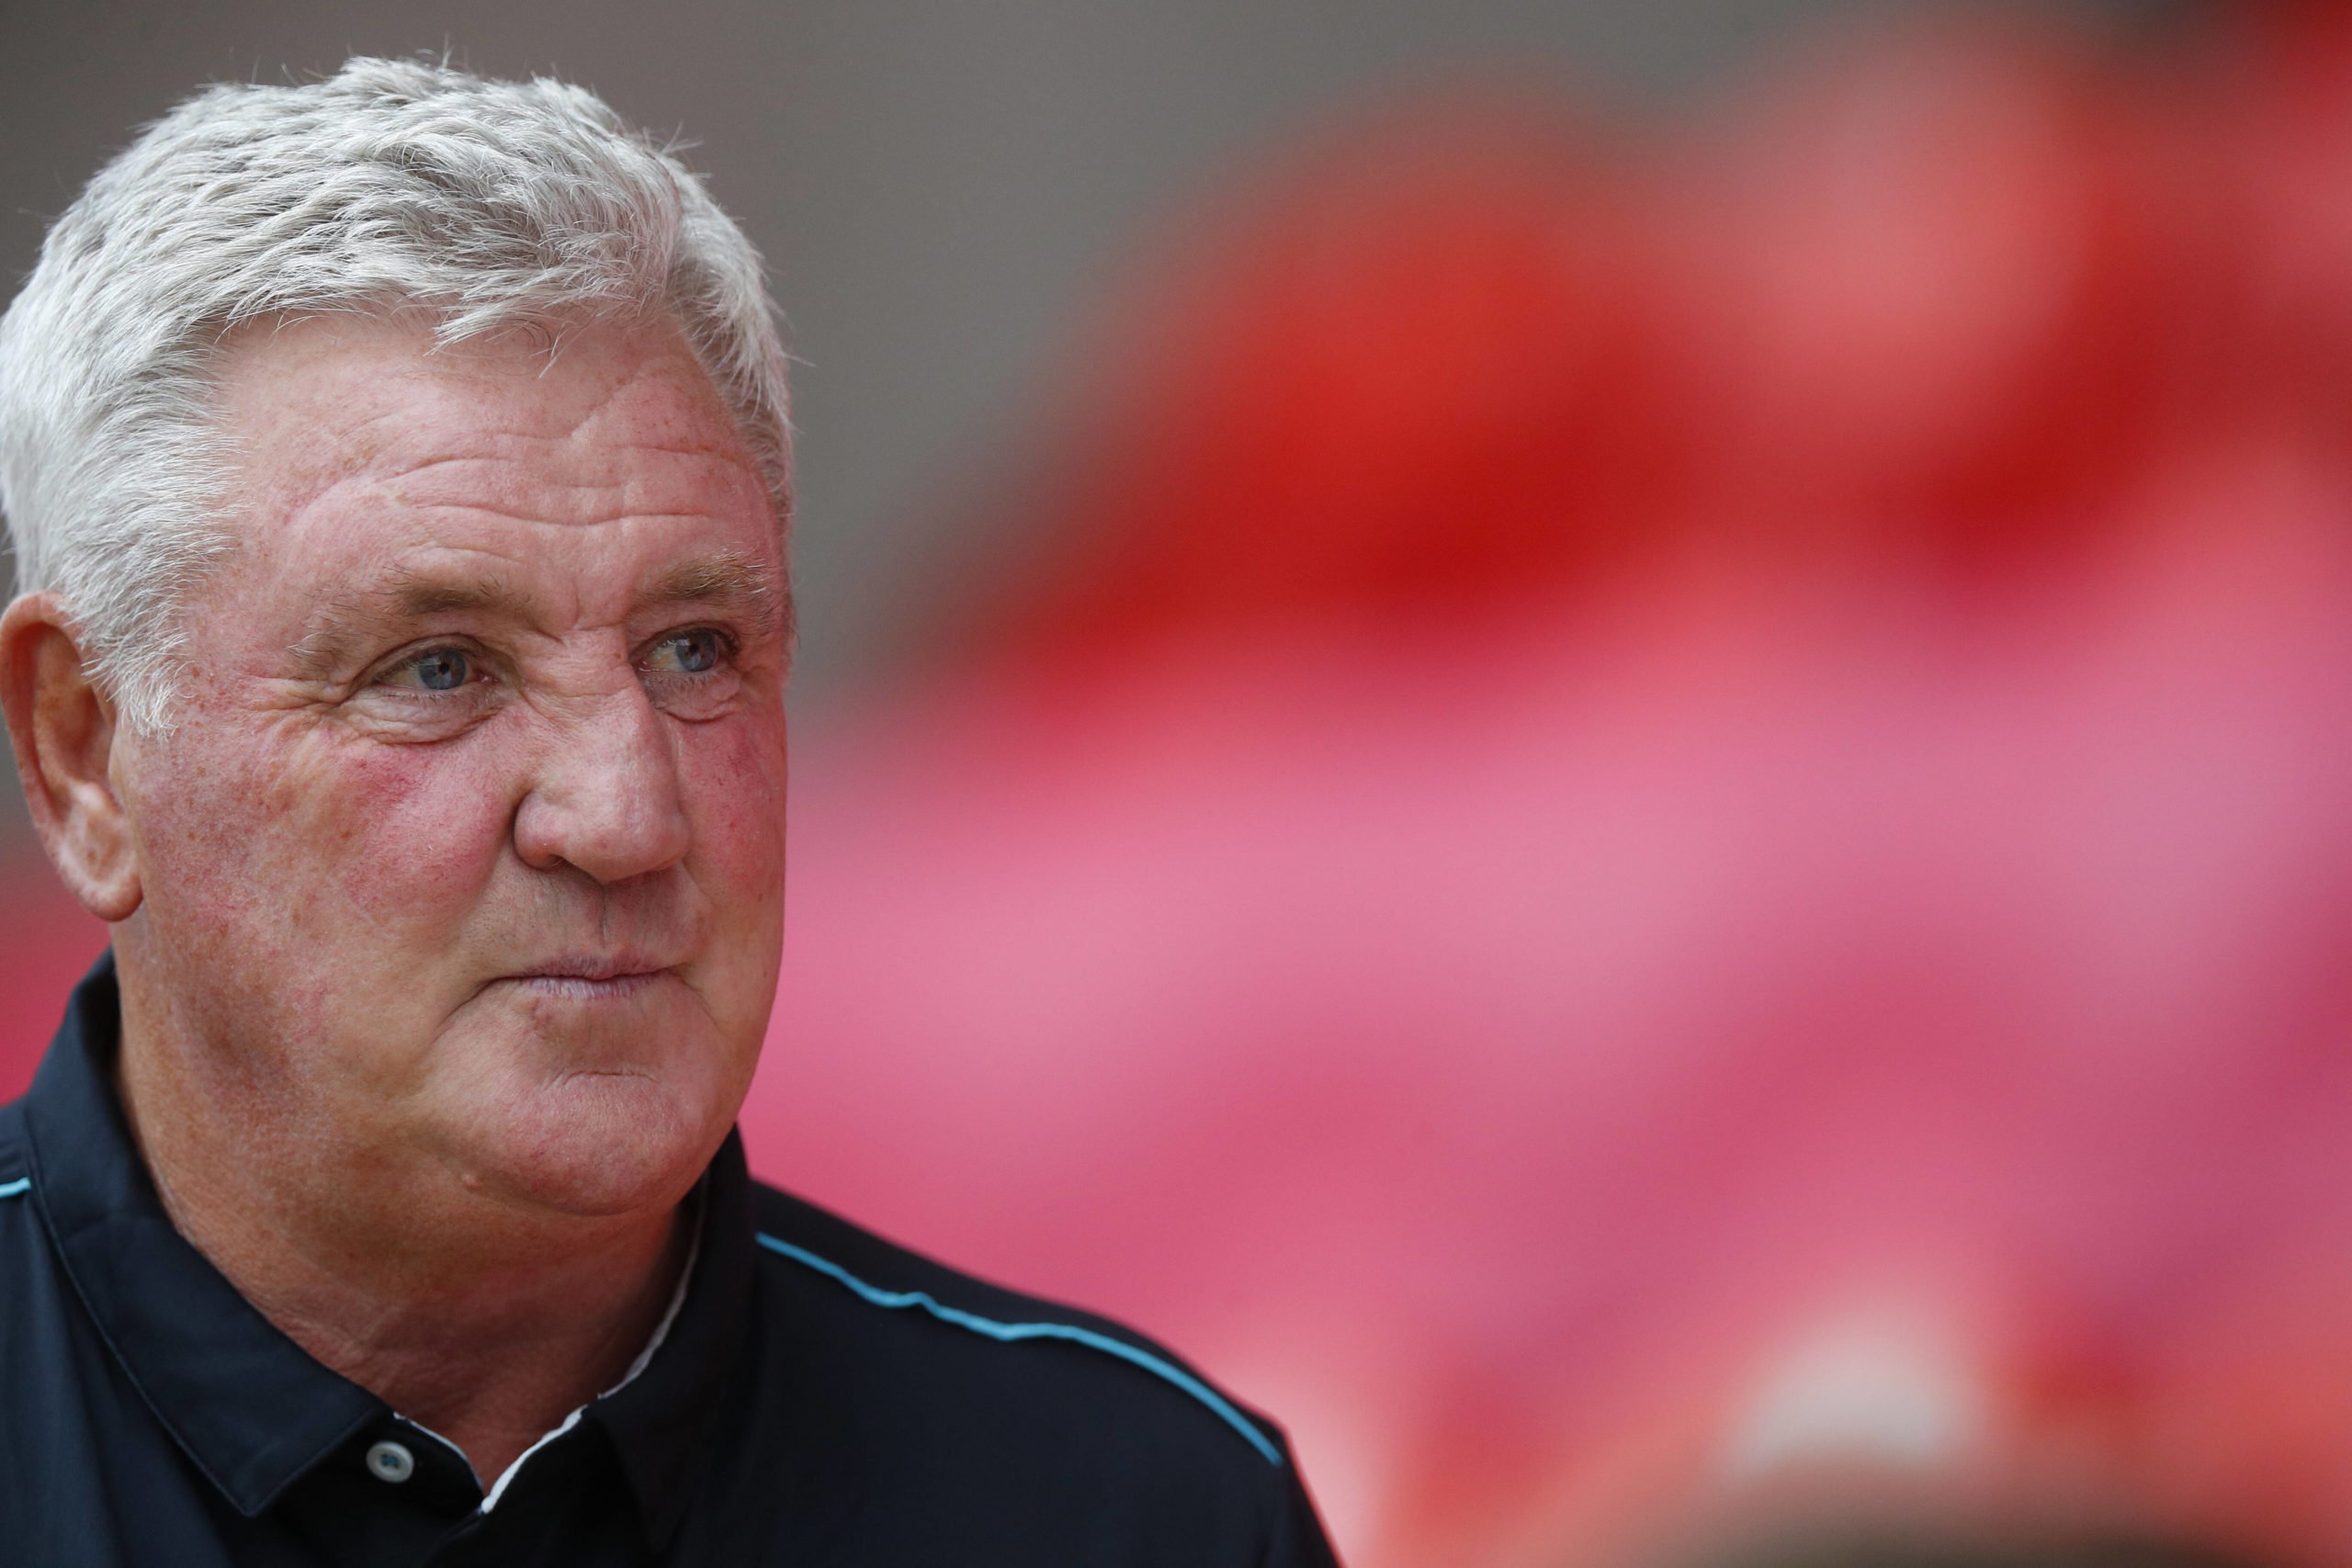 Santiago Munoz is on track to join Newcastle United (Steve Bruce is seen in the photo)